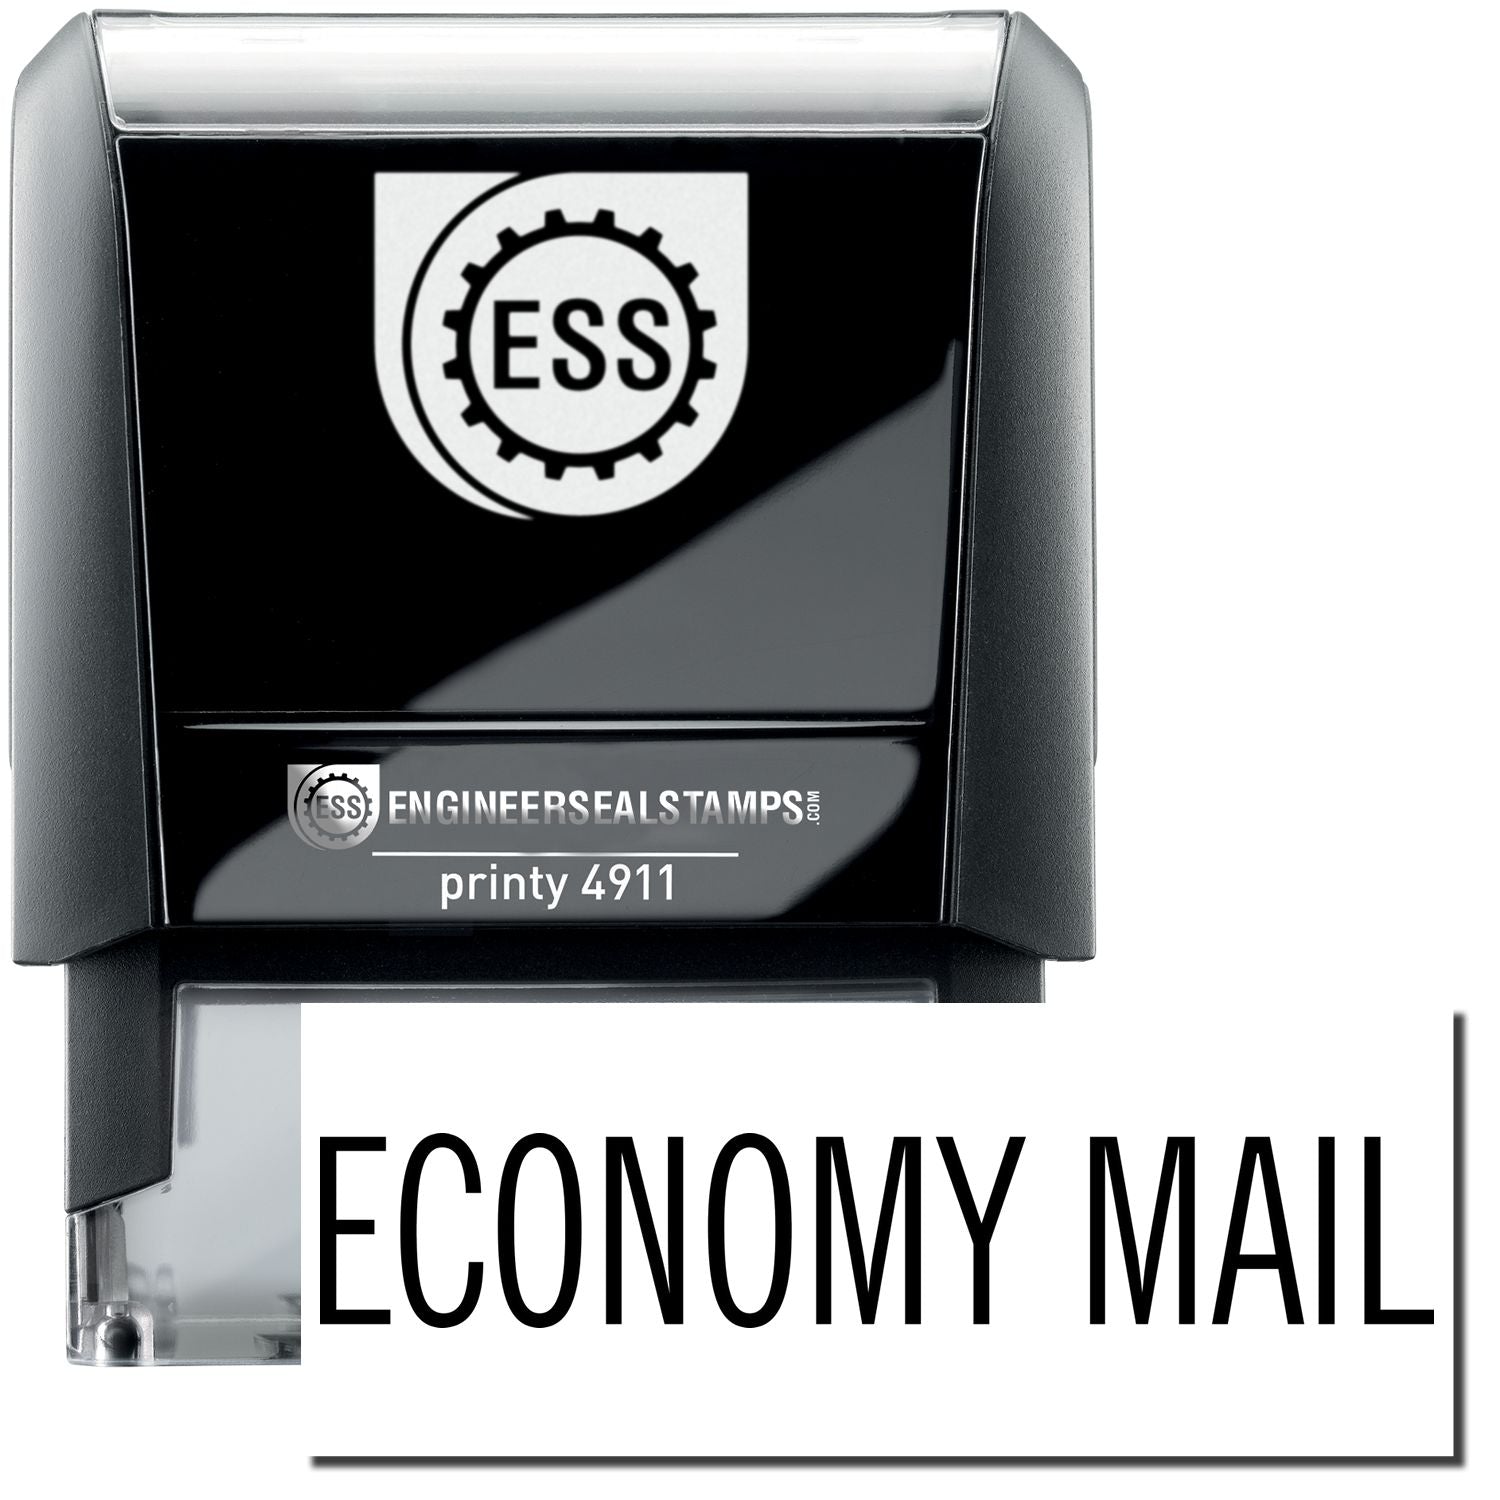 A self-inking stamp with a stamped image showing how the text "ECONOMY MAIL" is displayed after stamping.